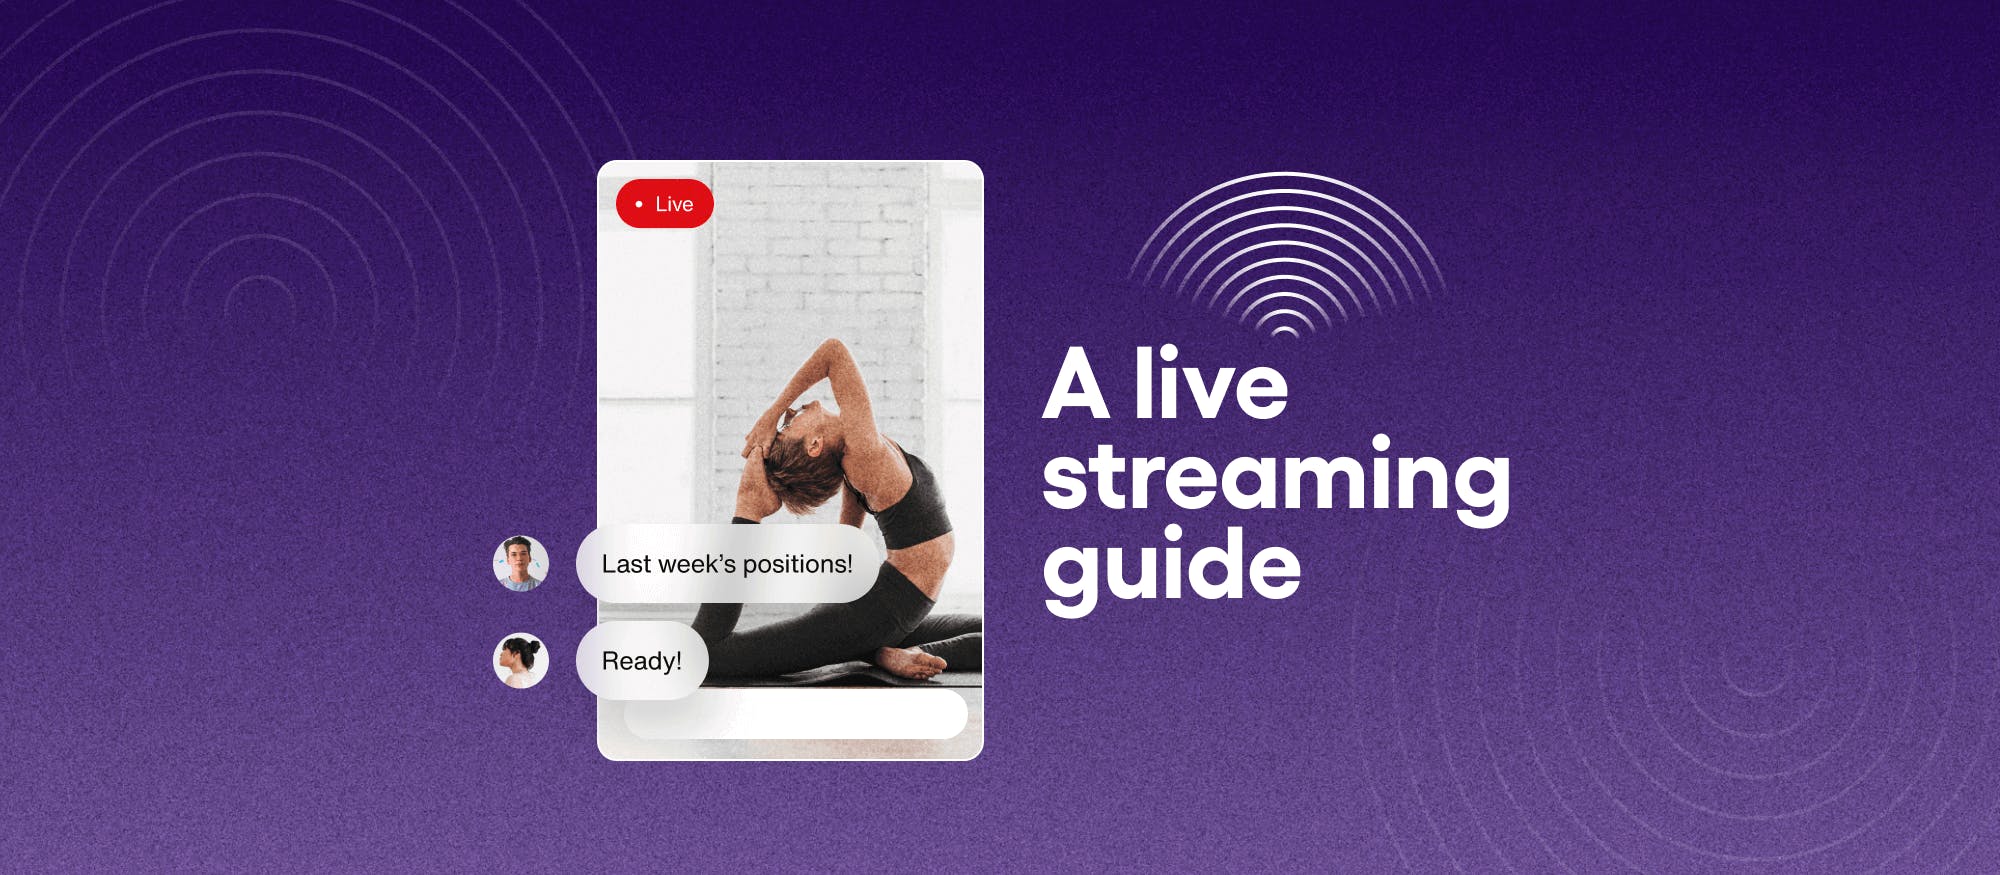 Ive streaming guide blog cover 1